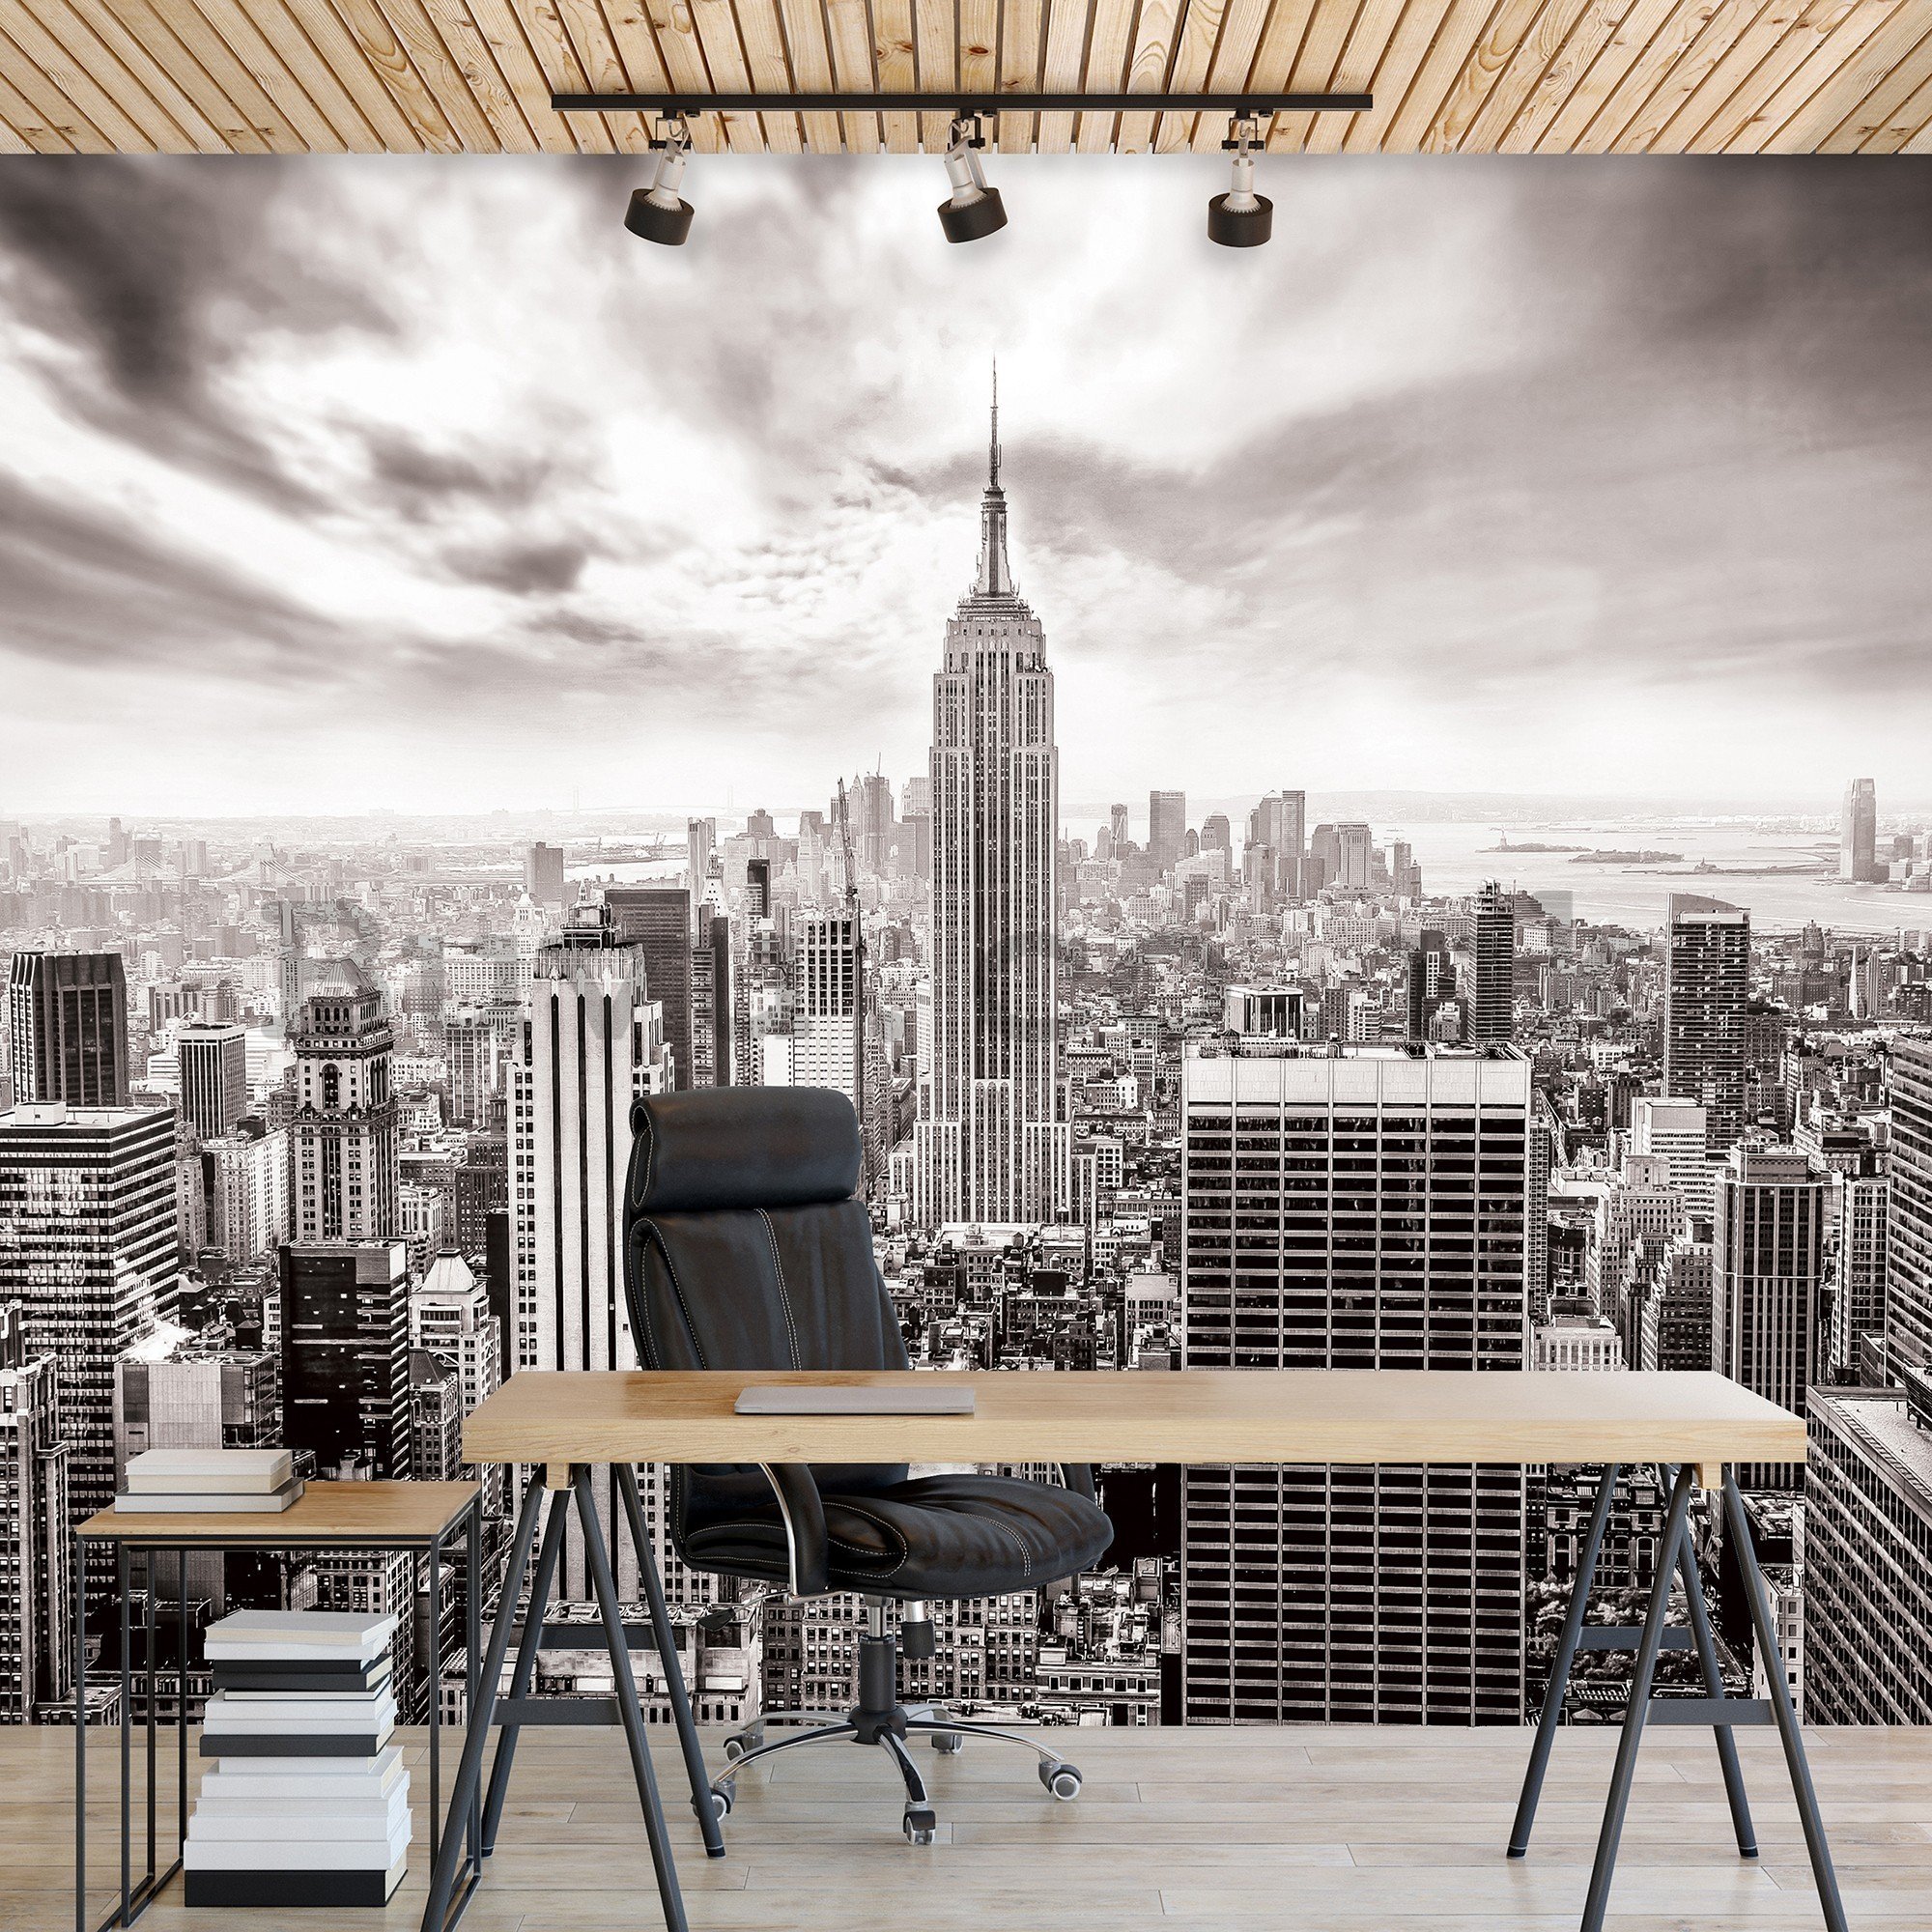 Wall mural vlies: View on New York (black and white) - 416x254 cm